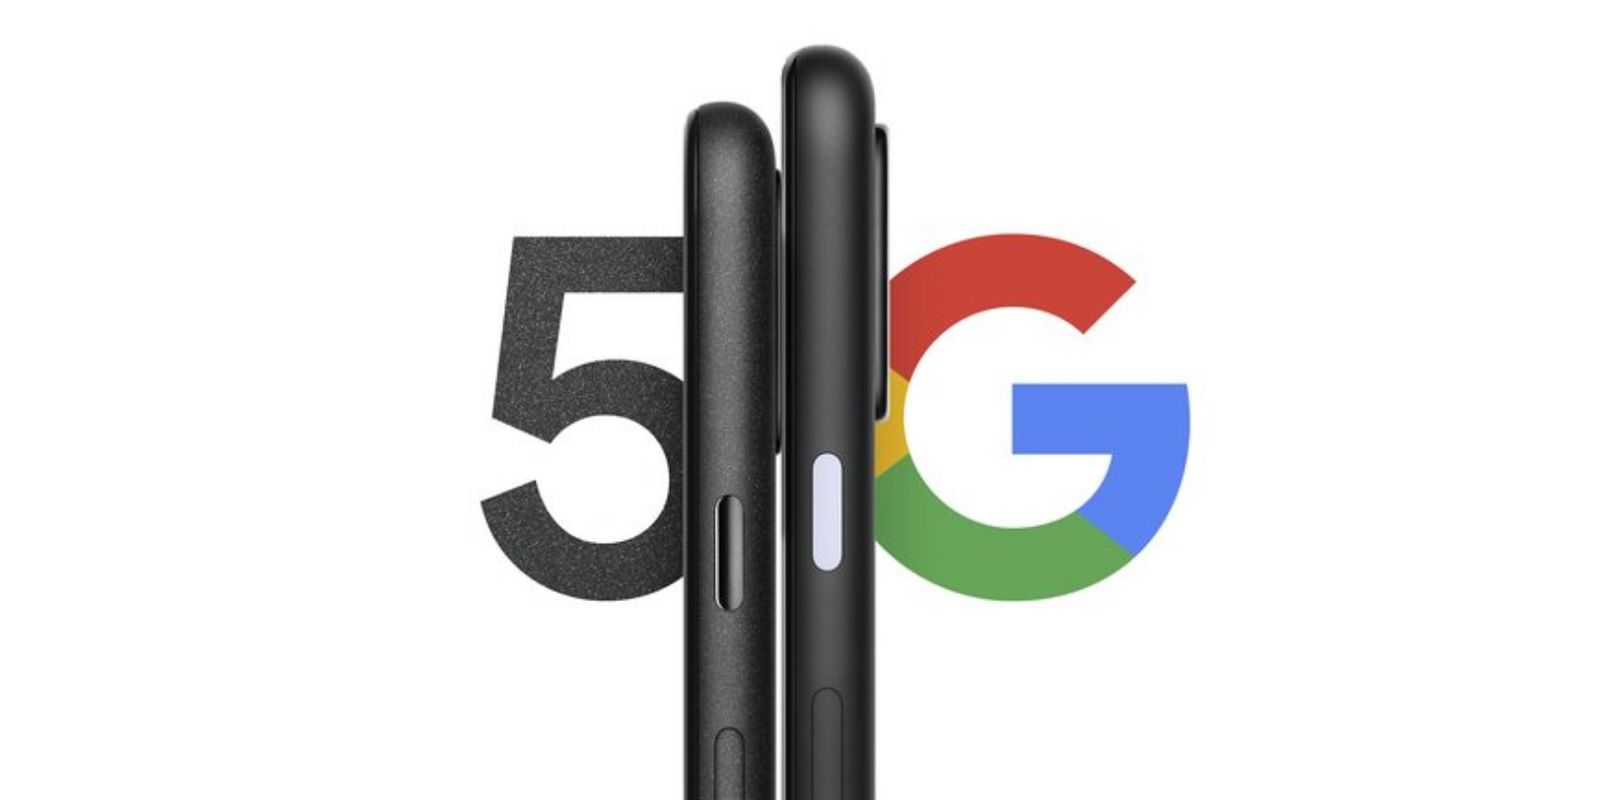 Google Pixel 5 & Pixel 4a 5G Image Leaks Along With Rumored Battery Details